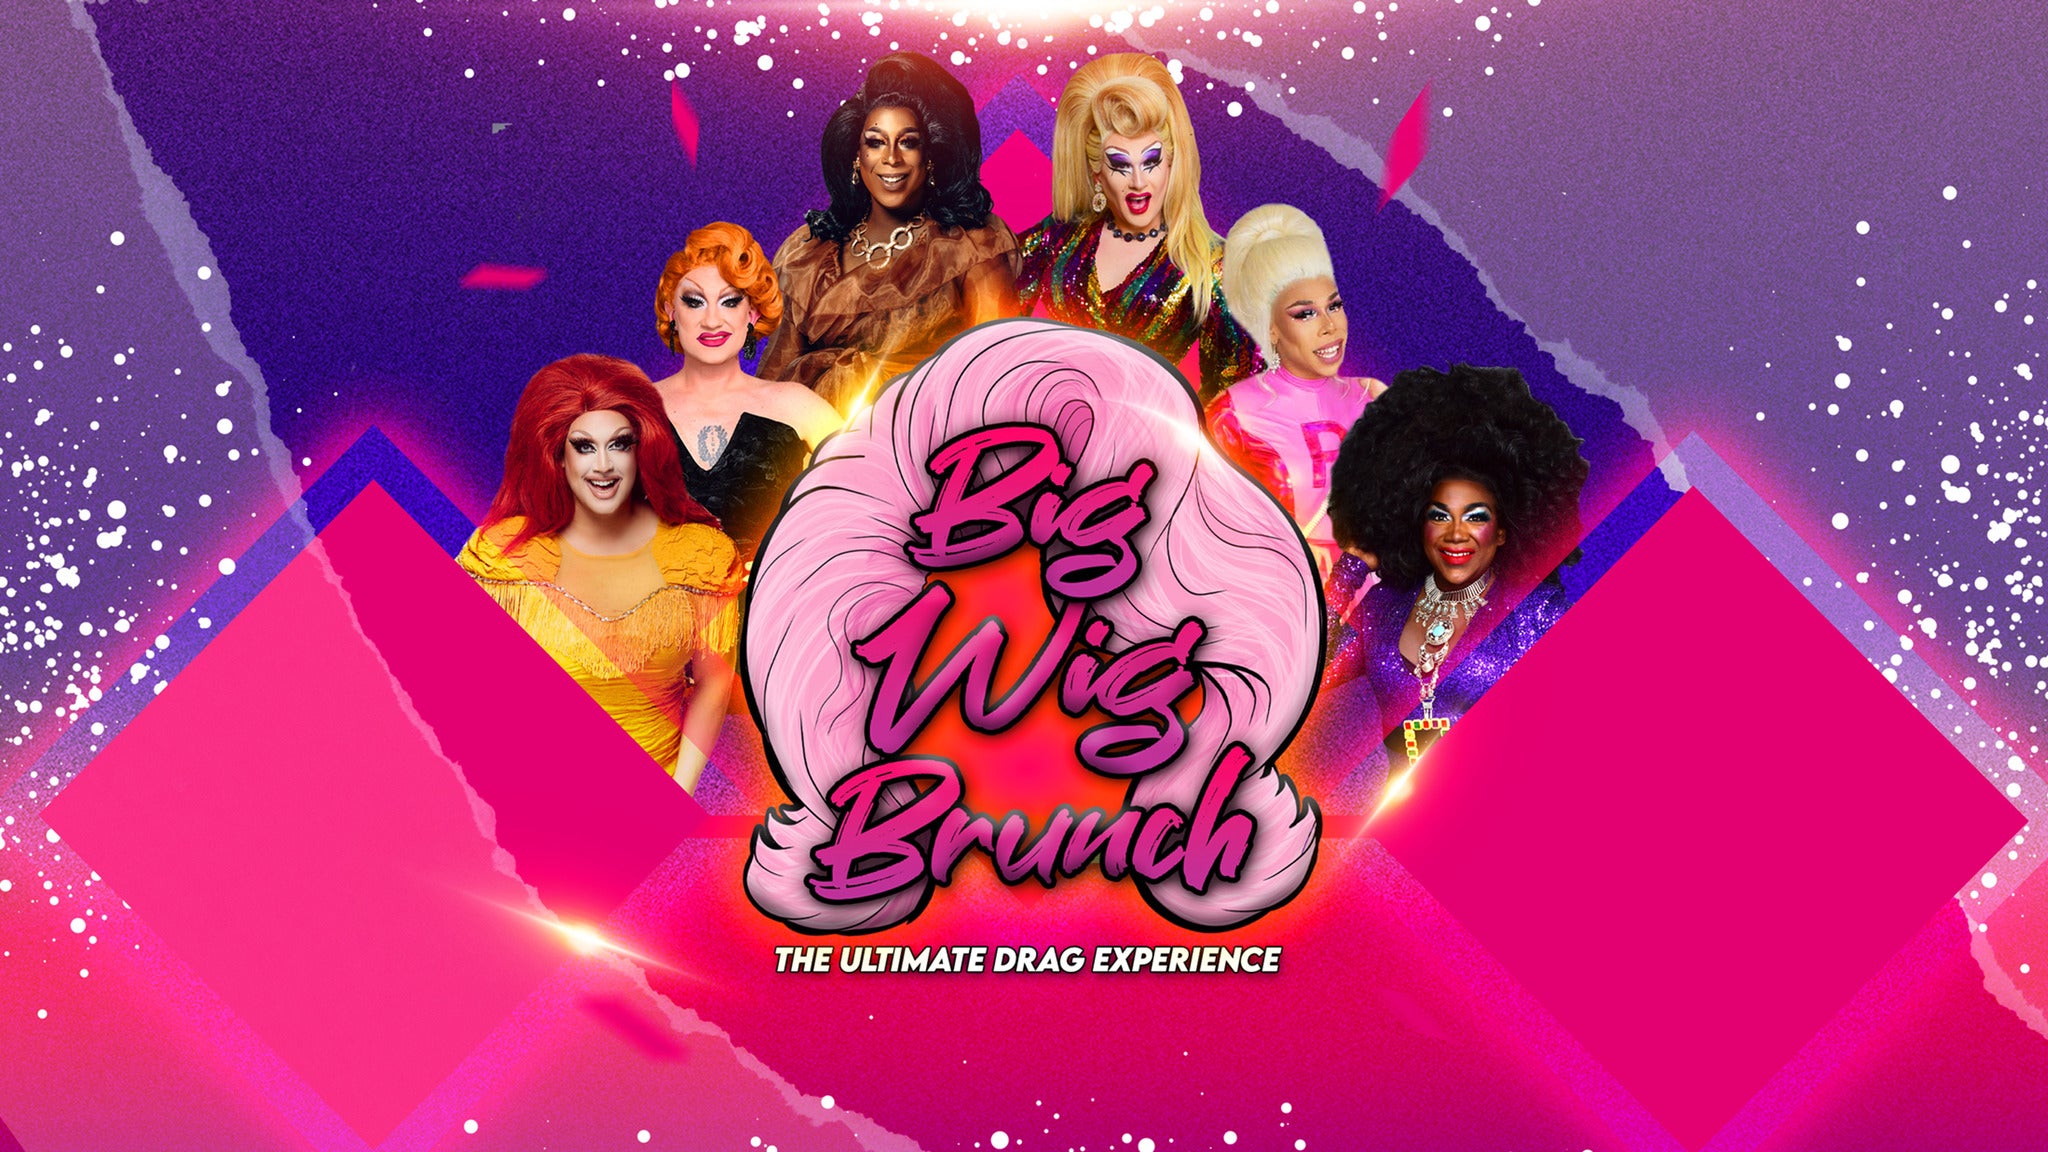 Big Wig Country Queens Brunch: The Ultimate Drag Experience